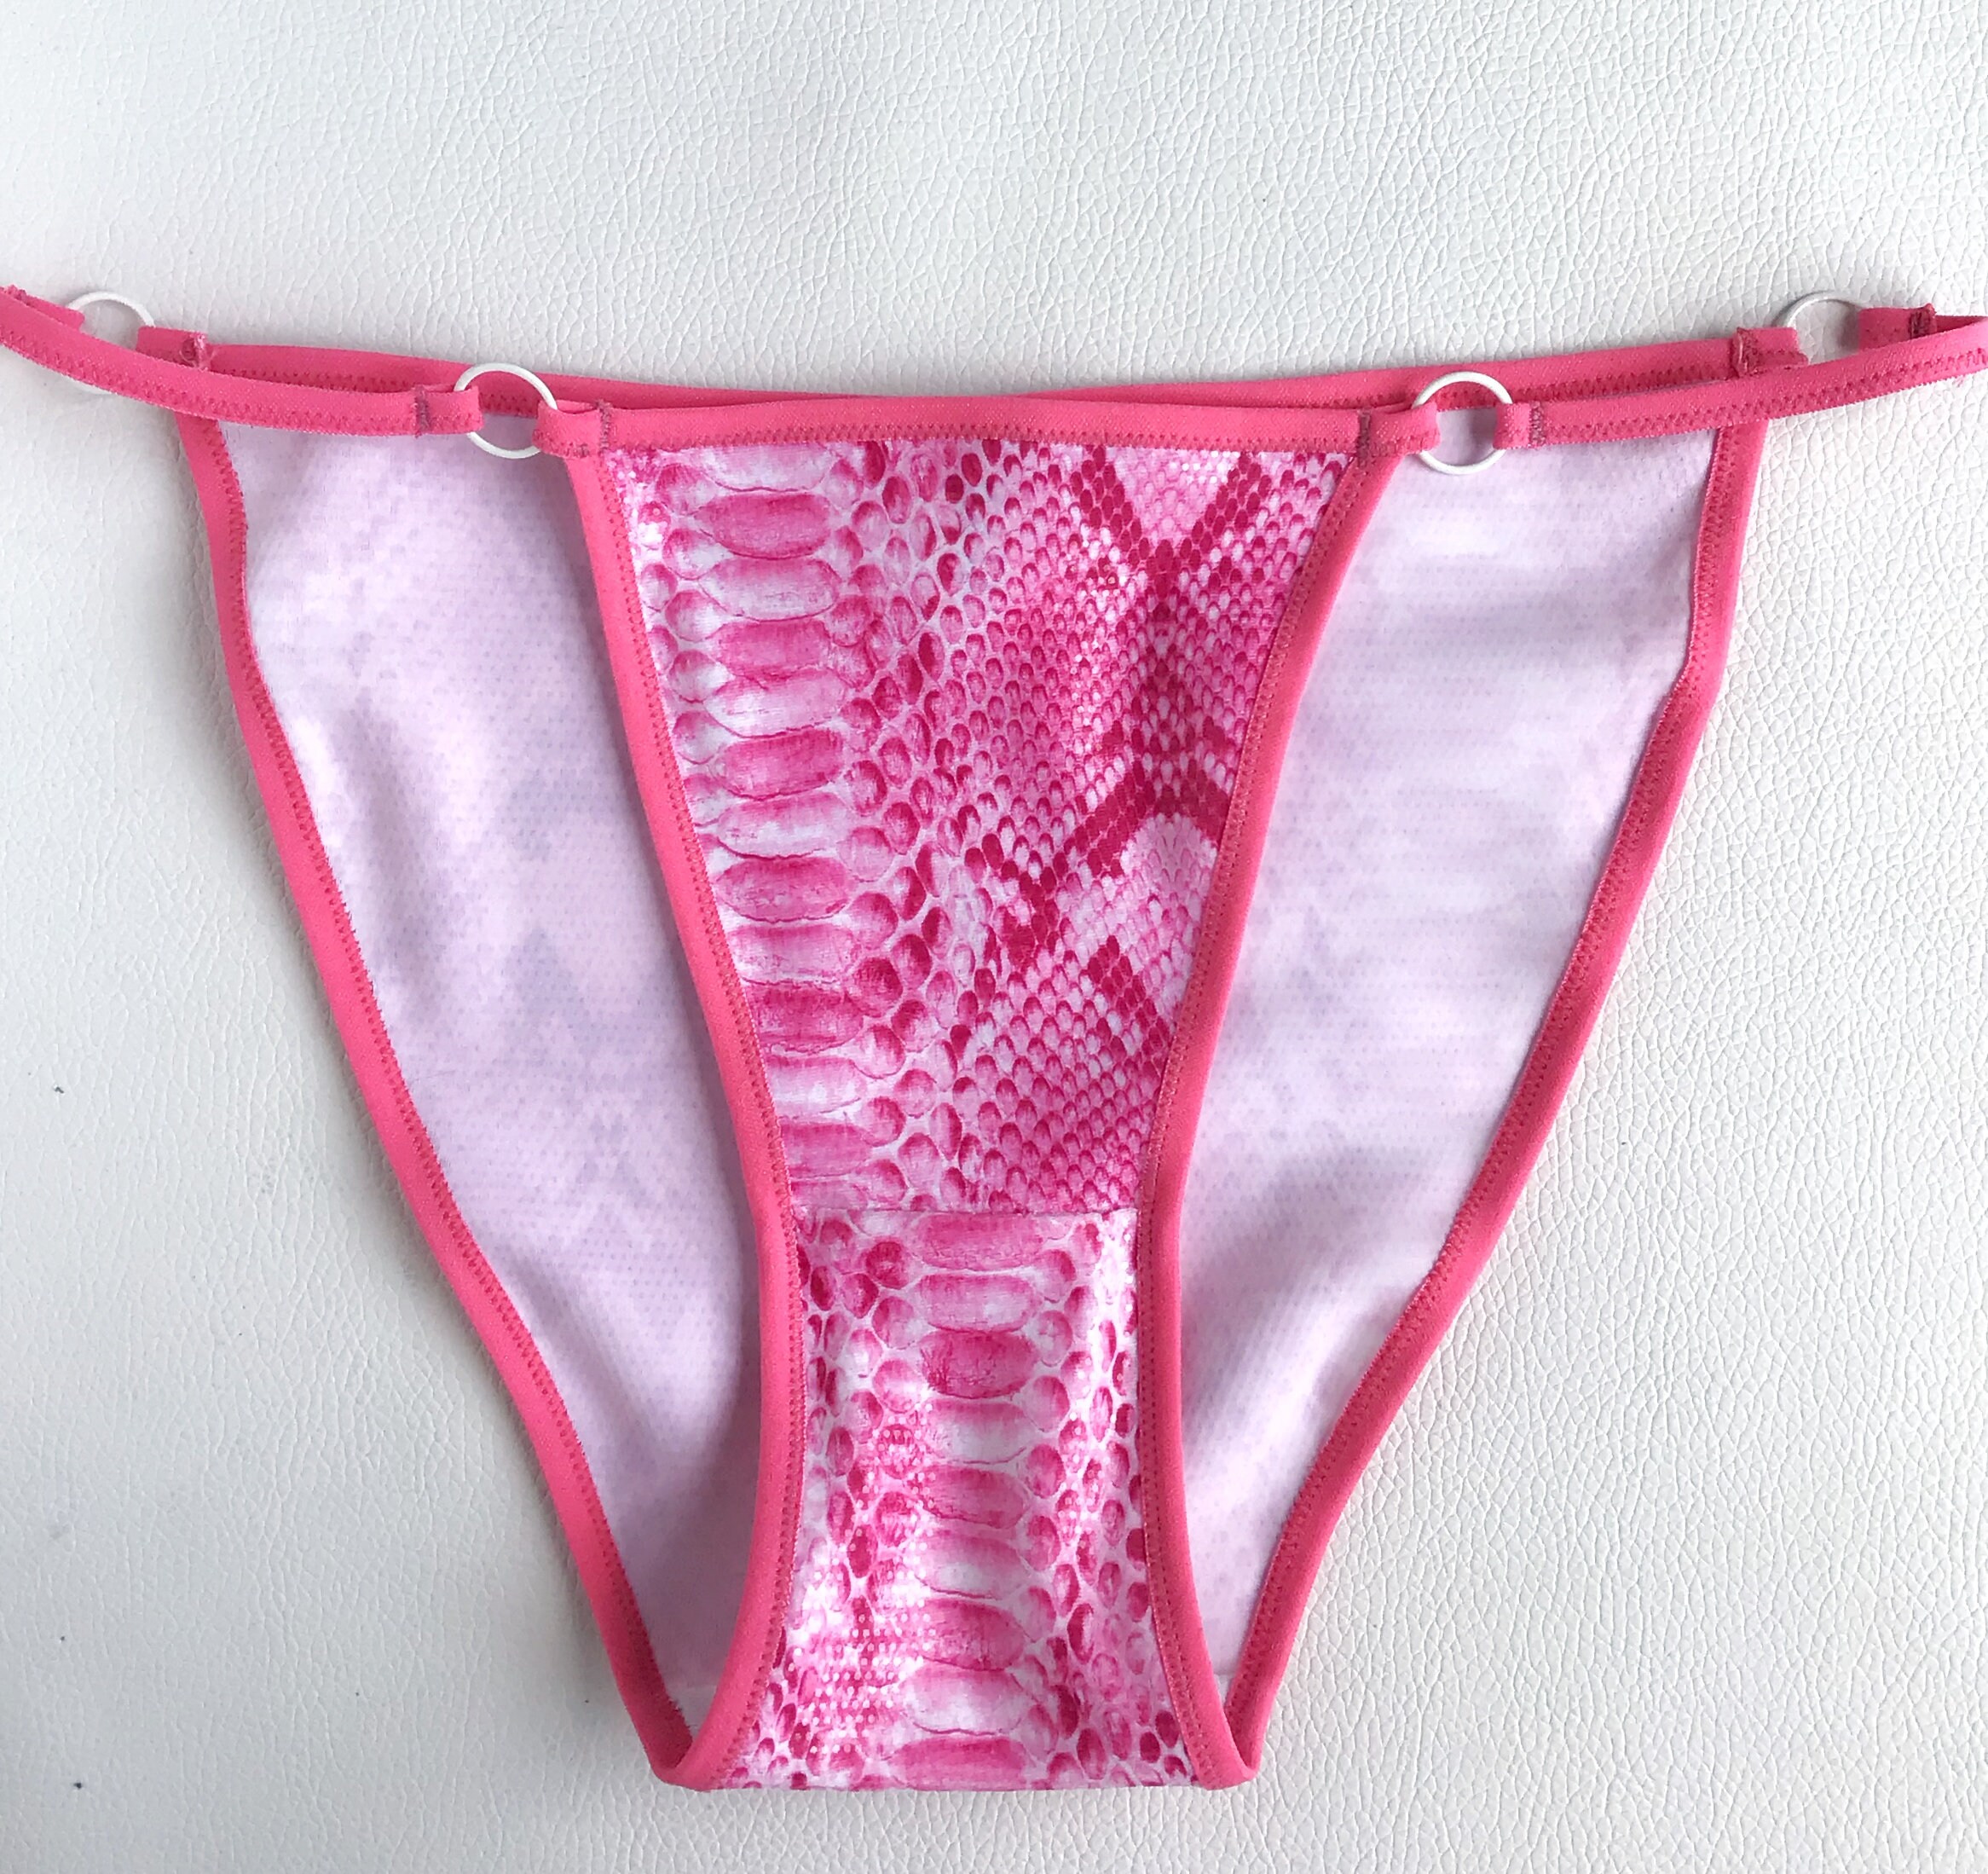 Hot pink snake knickers. High cut full coverage retro panties. Barbie pink underwear. Sexy handmade to order lingerie. photo